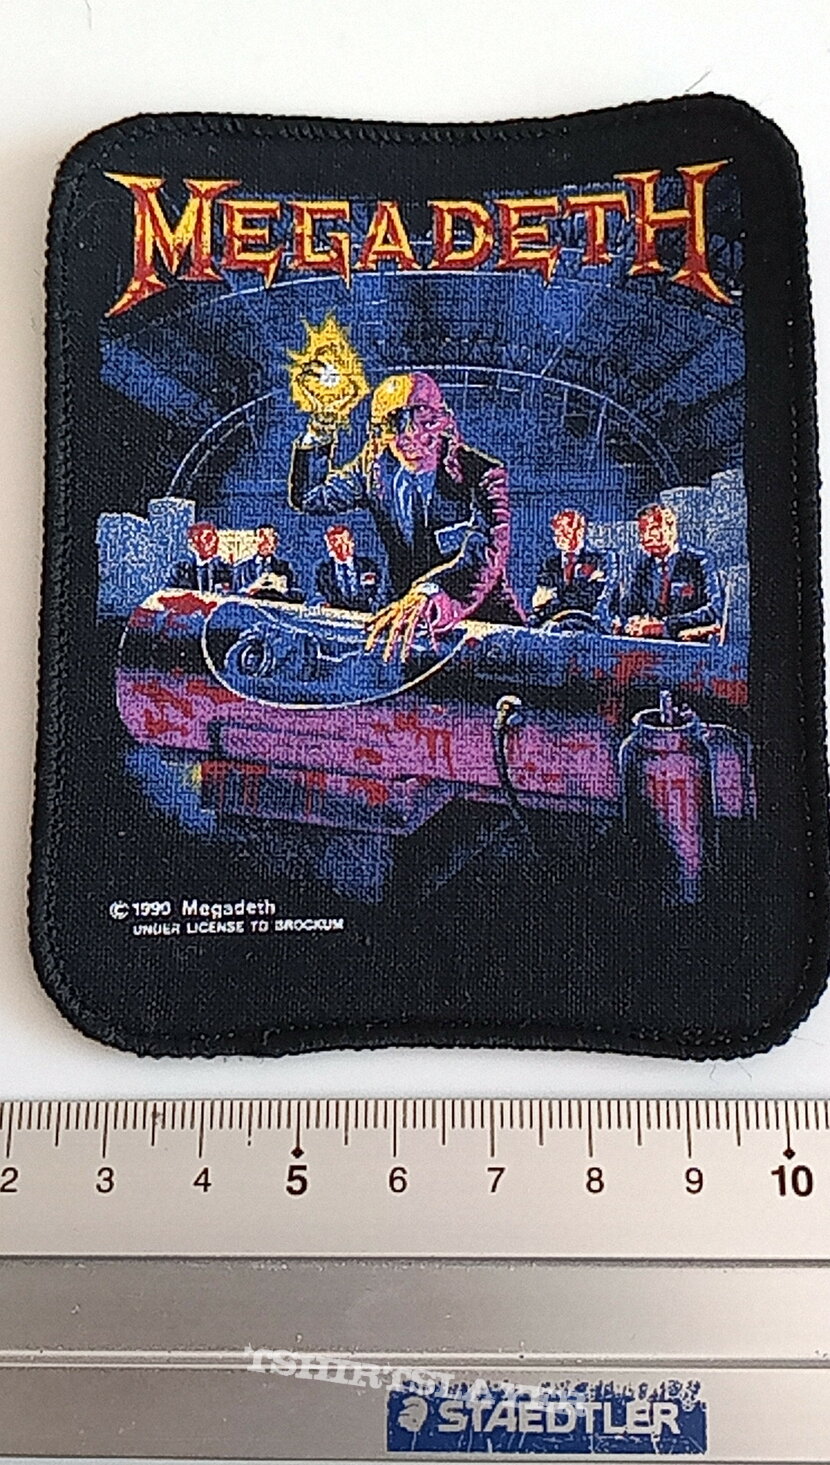 MEGADETH 1990 rust in peace   patch 15 new 10x8 cm round corners